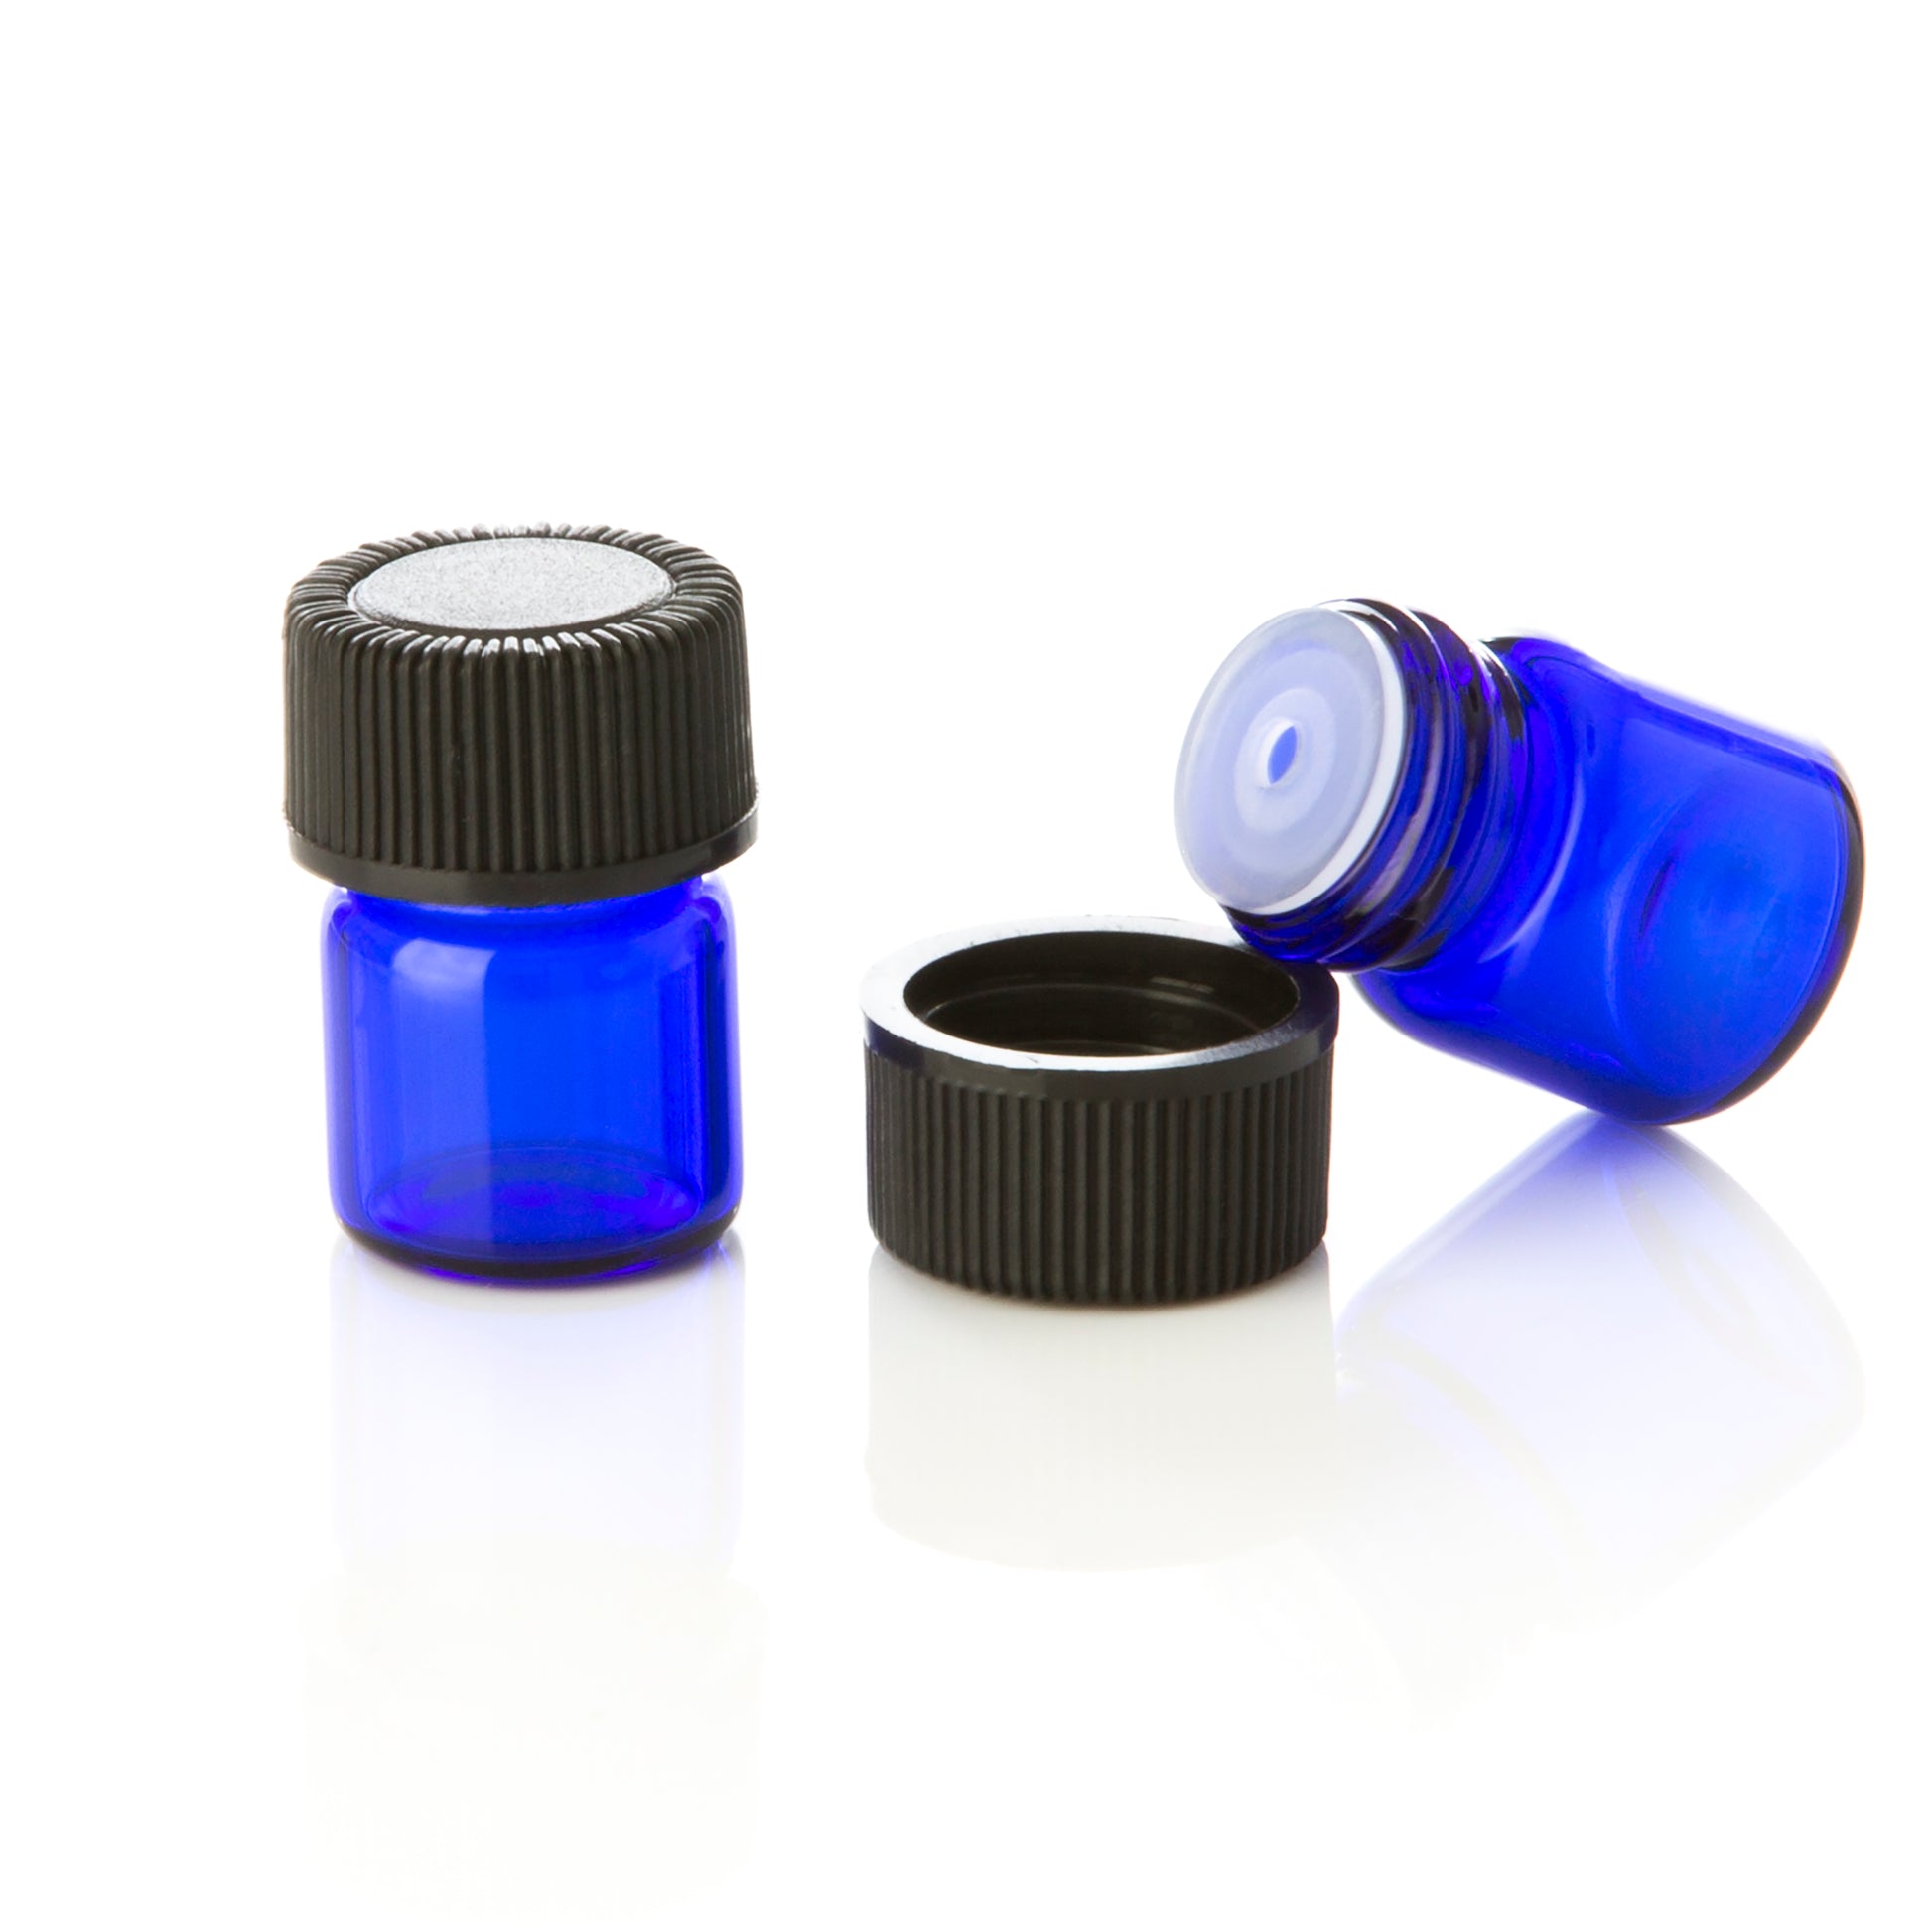 1 ml Blue Glass Vial with Orifice Reducer